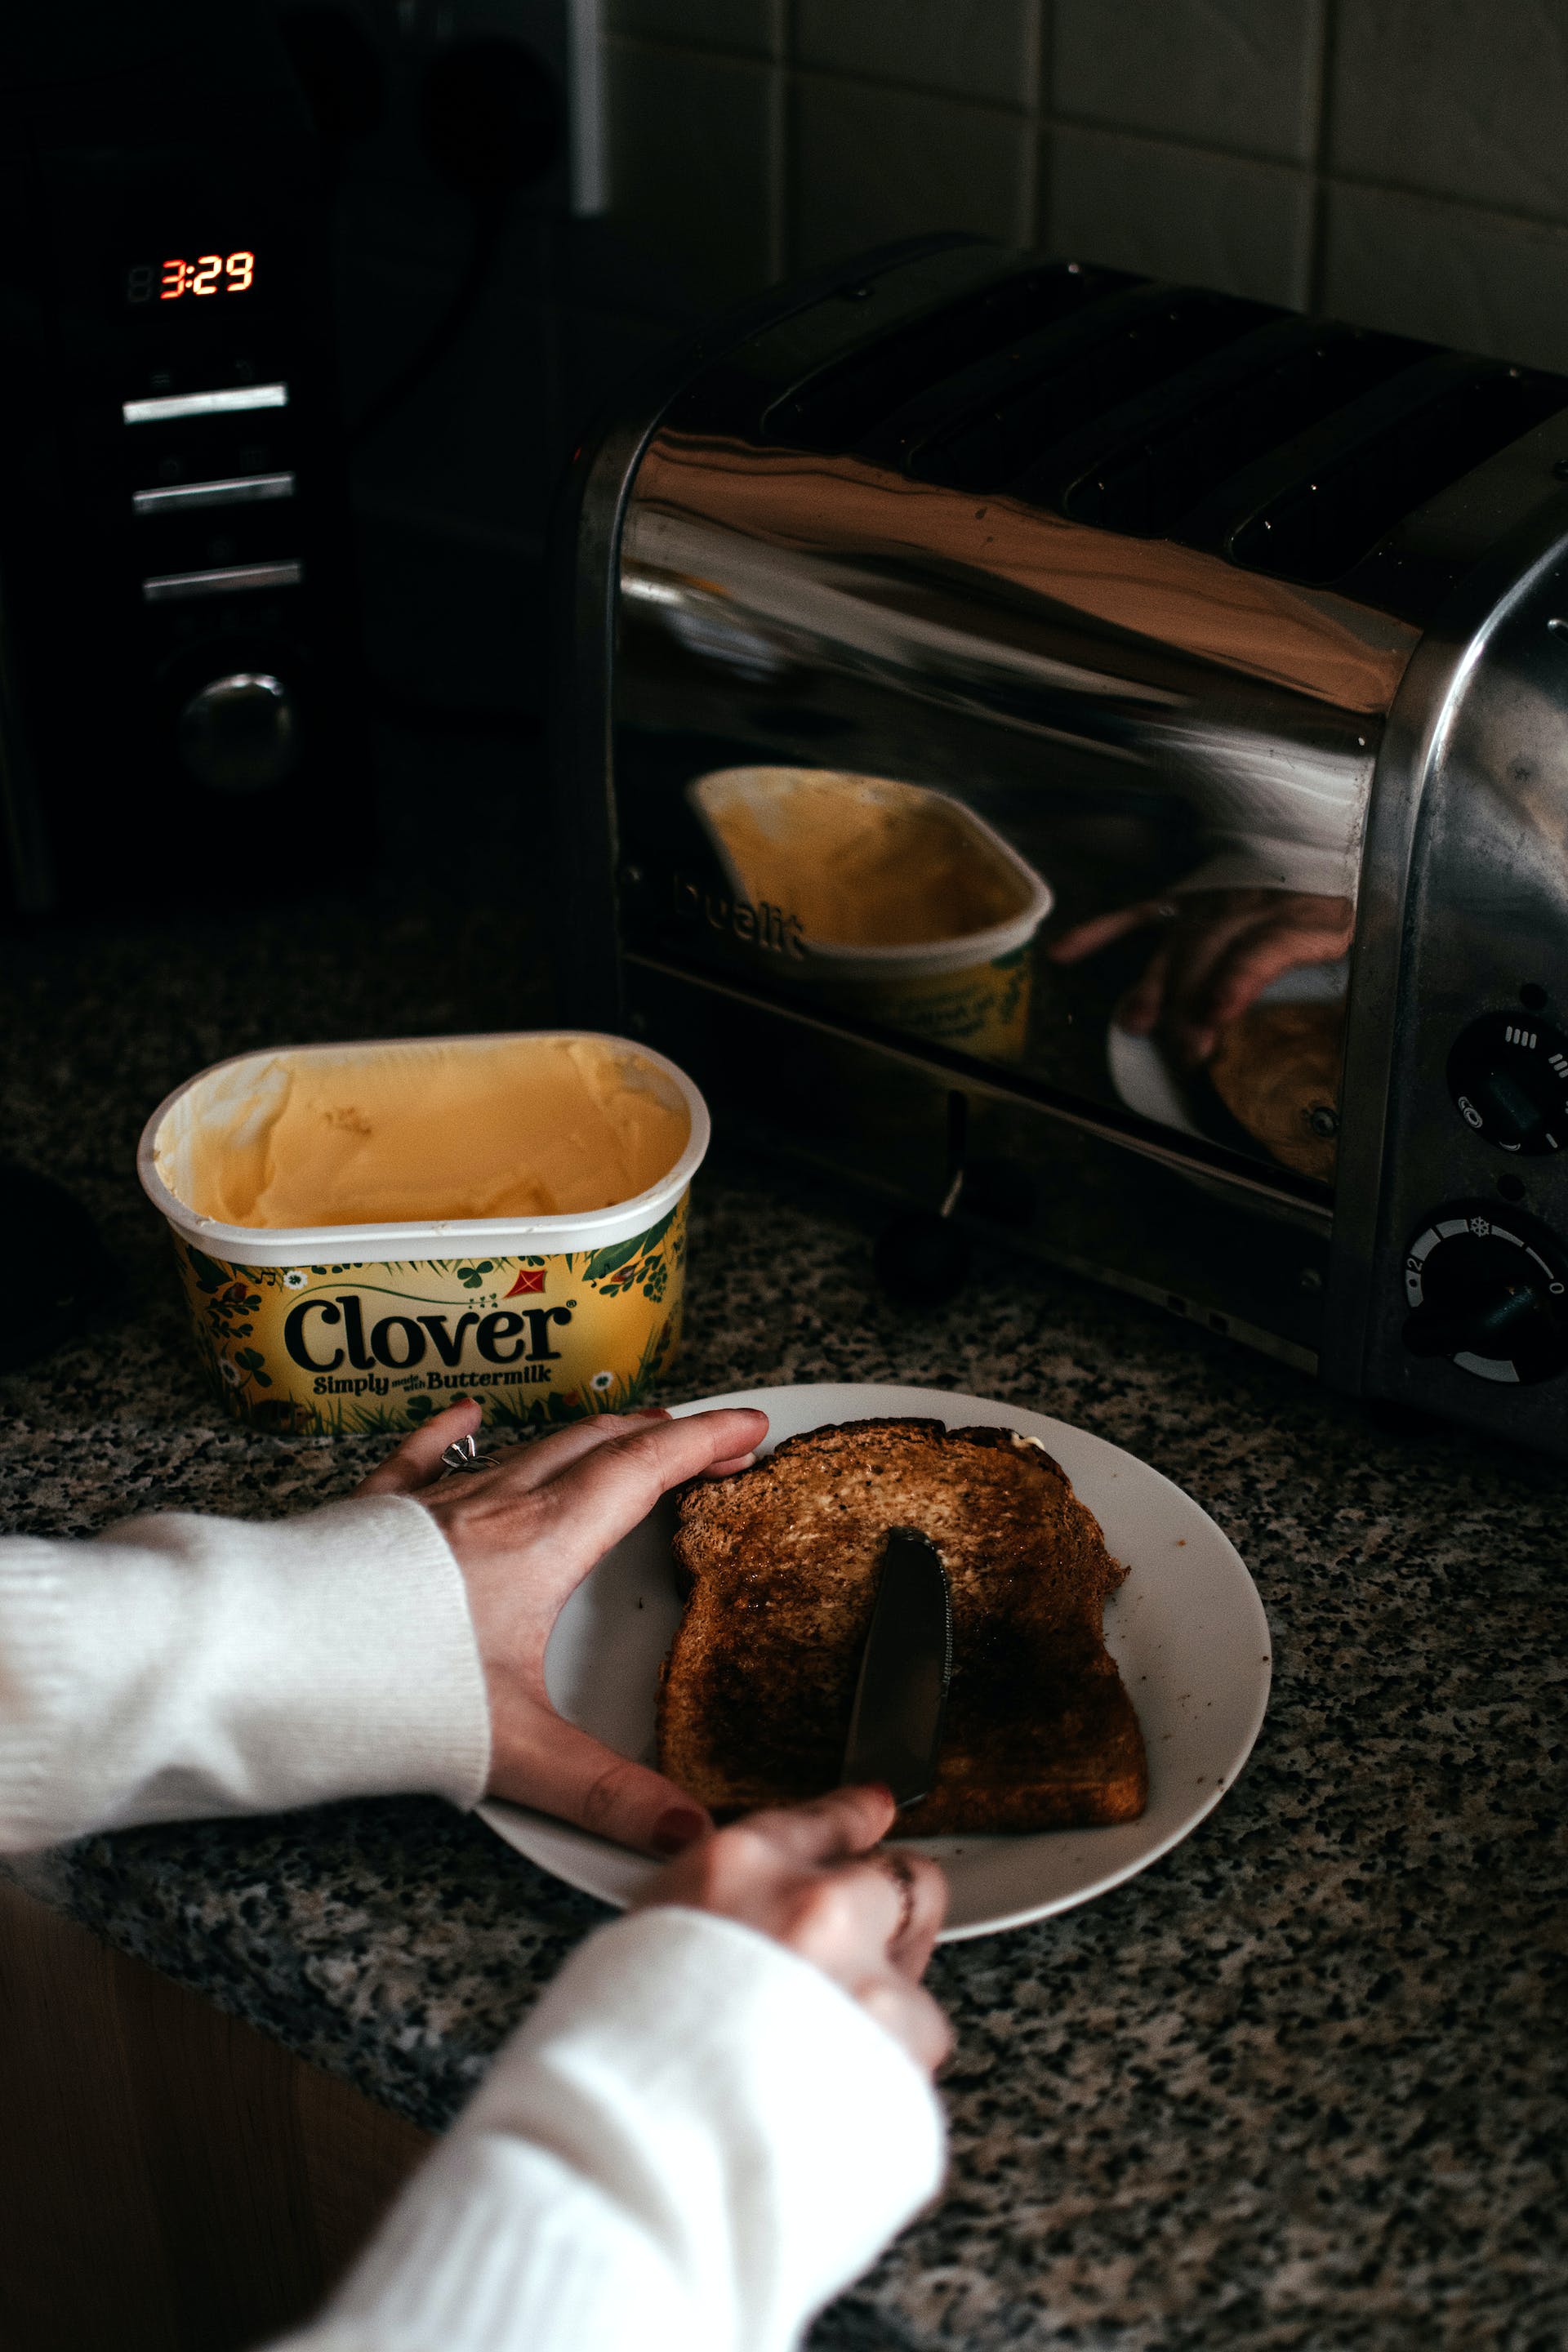 Person spreading butter on toast | Source: Pexels